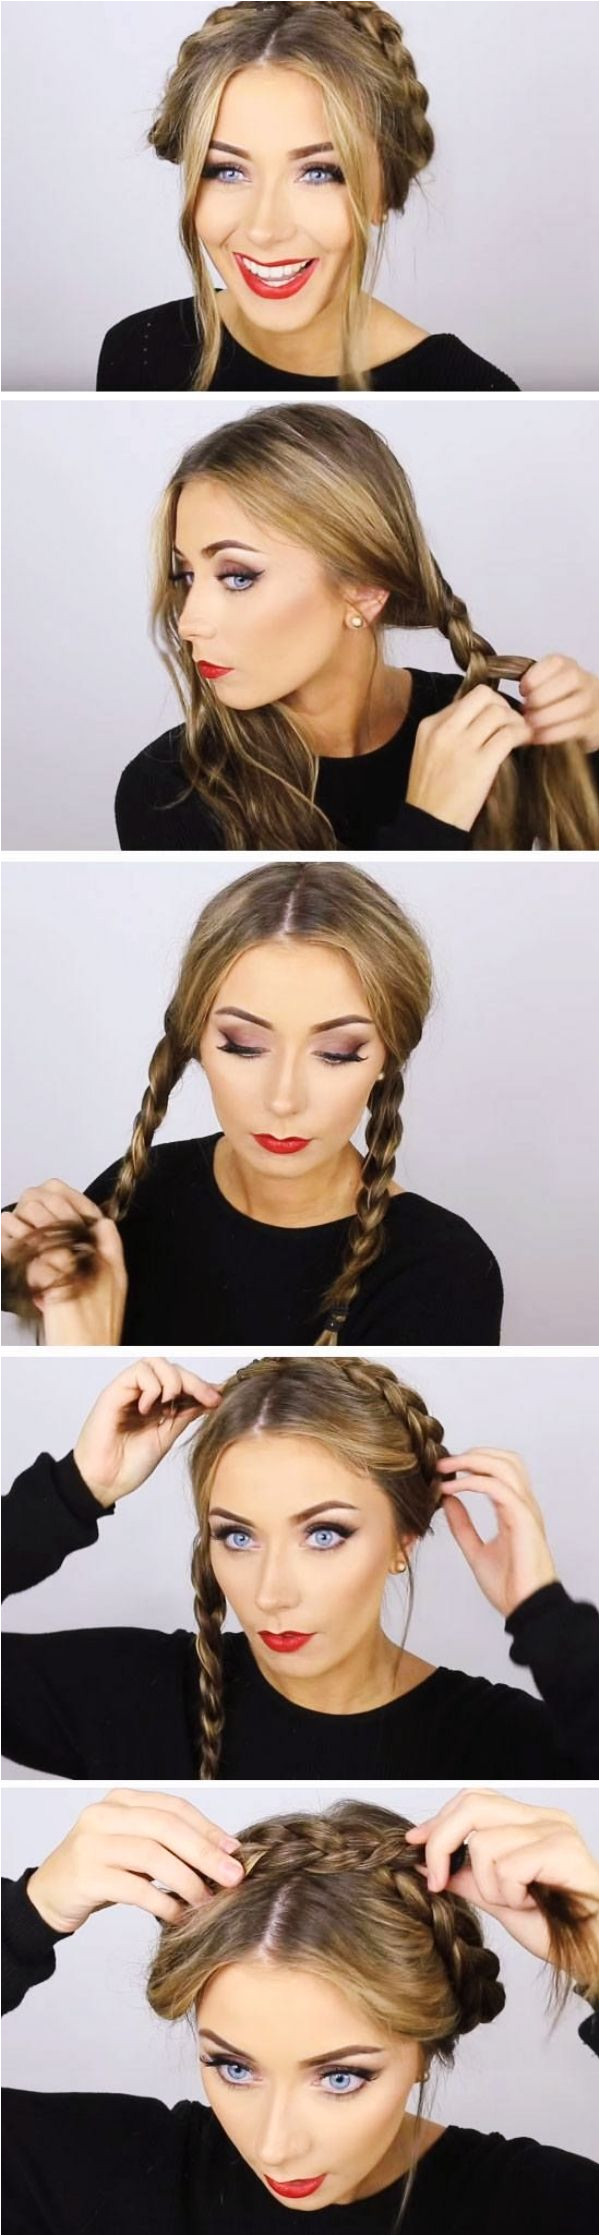 Hairstyles that can be done in 3 minutes